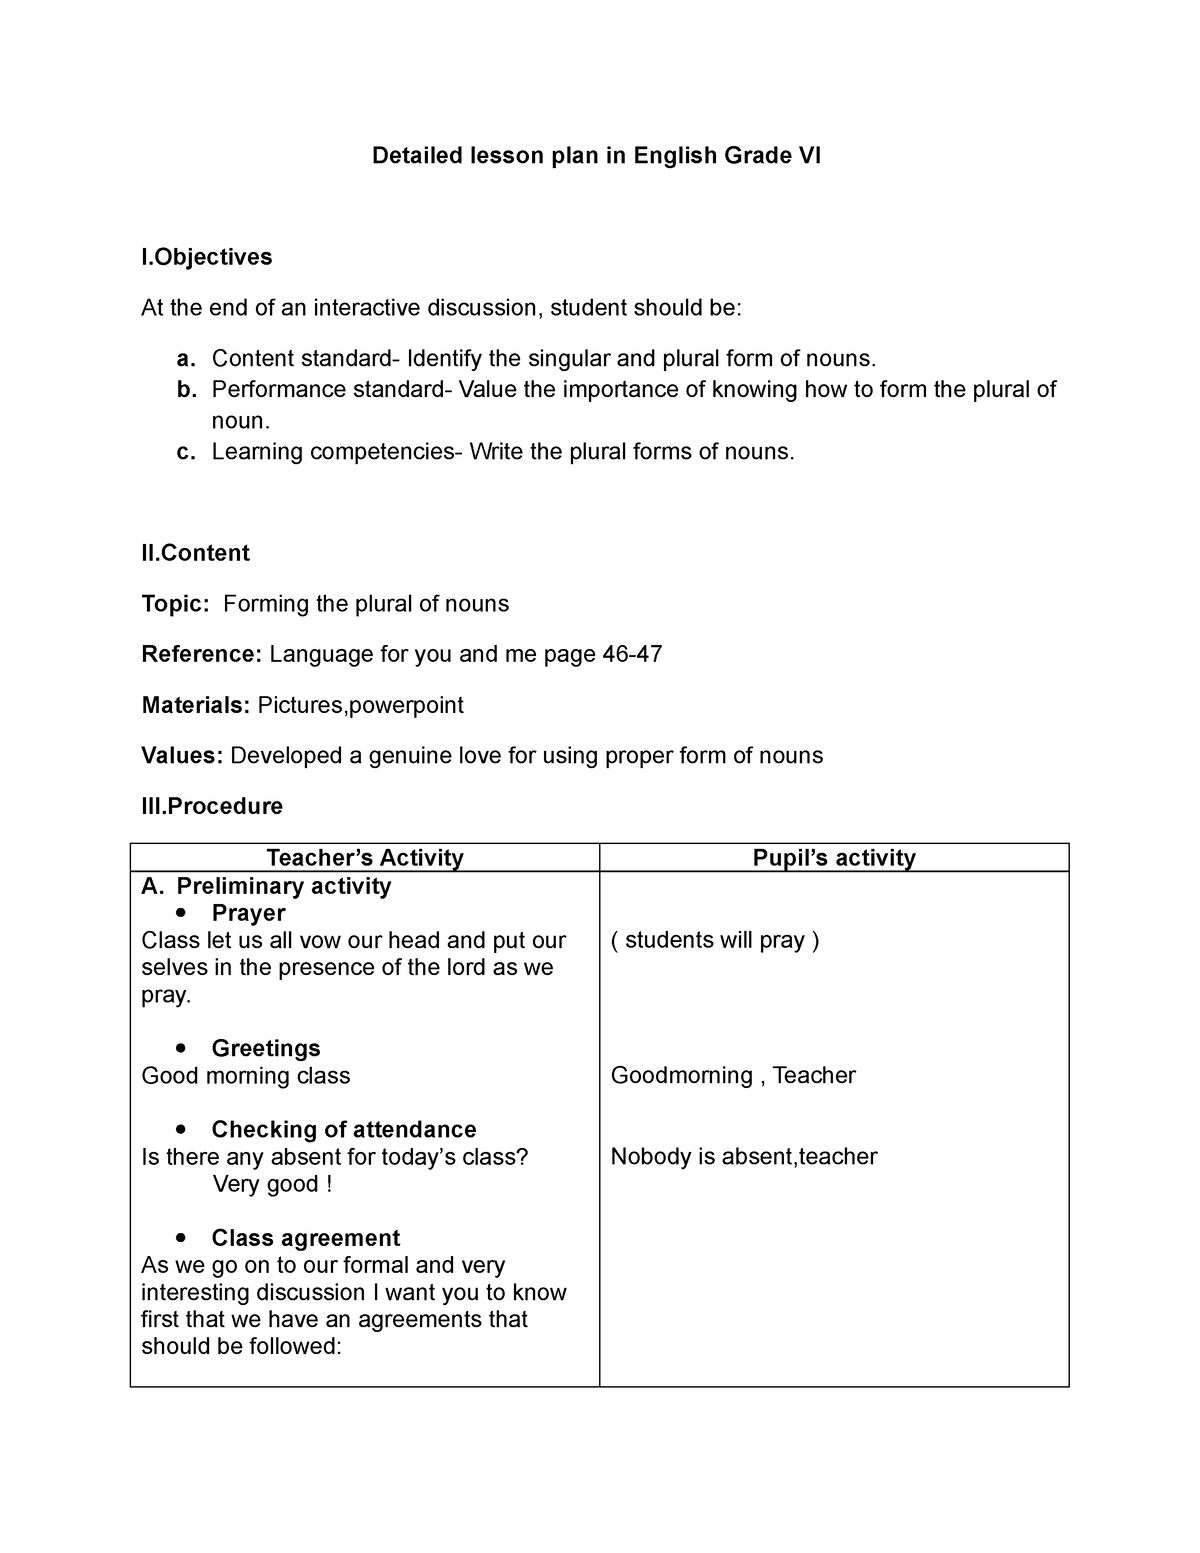 detailed-lesson-plan-in-english-grade-vi-1-content-standard-identify-the-singular-and-plural